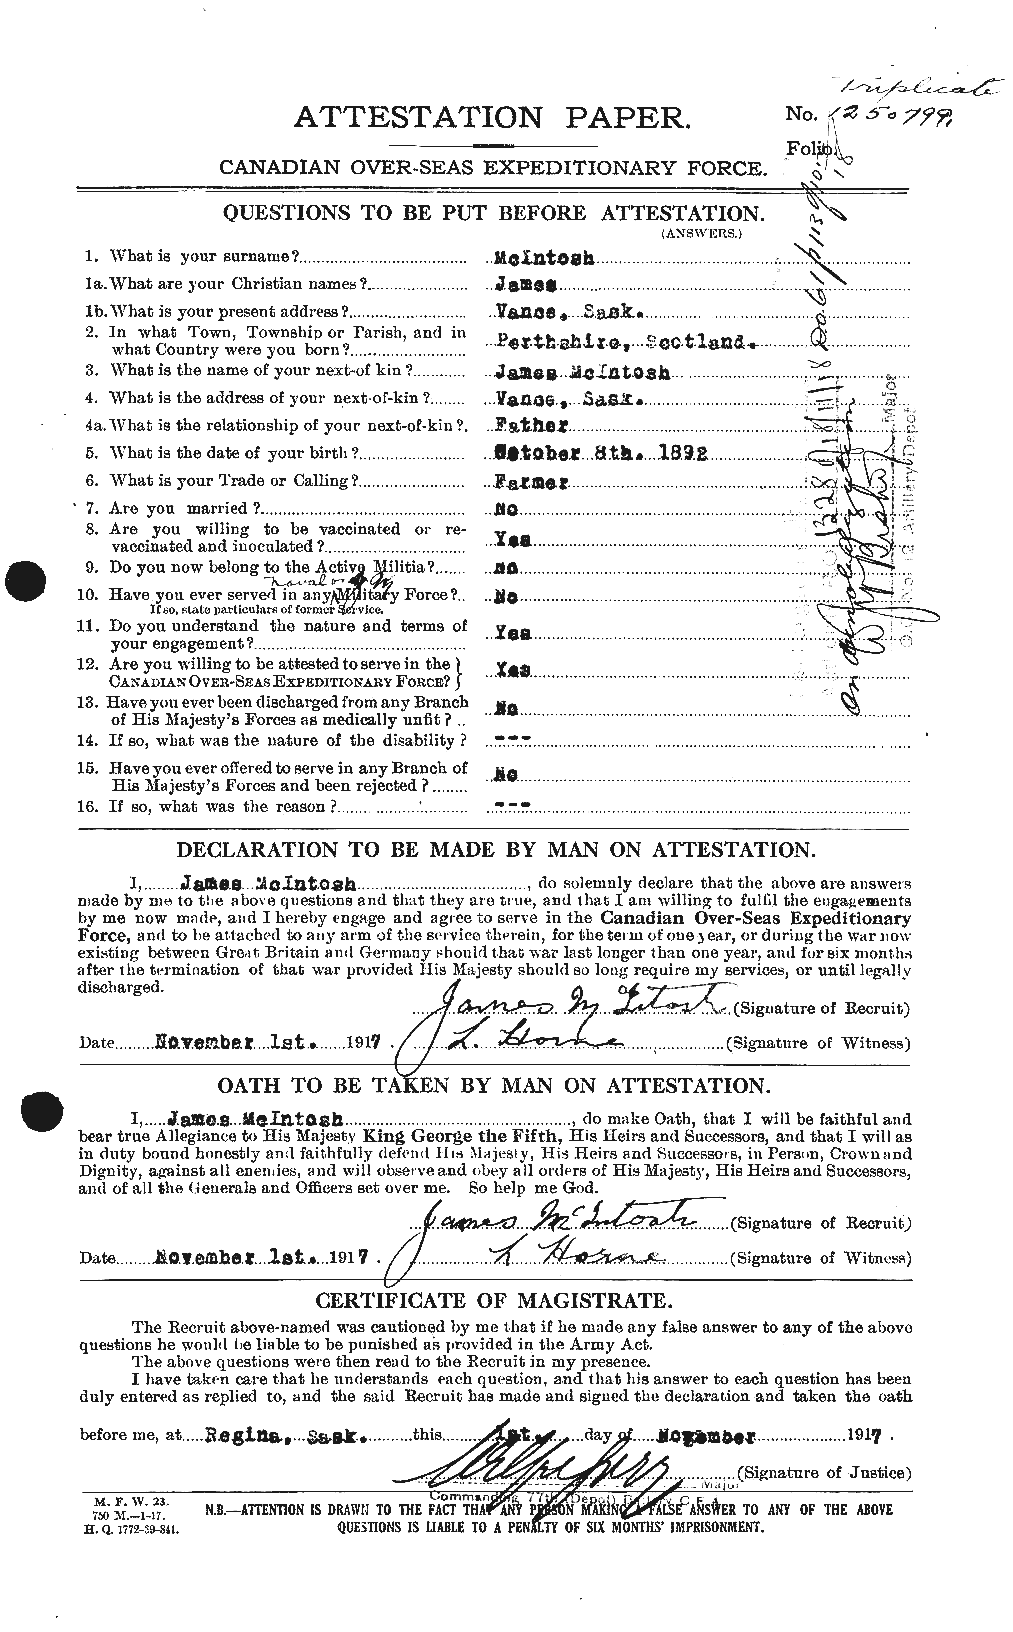 Personnel Records of the First World War - CEF 524995a